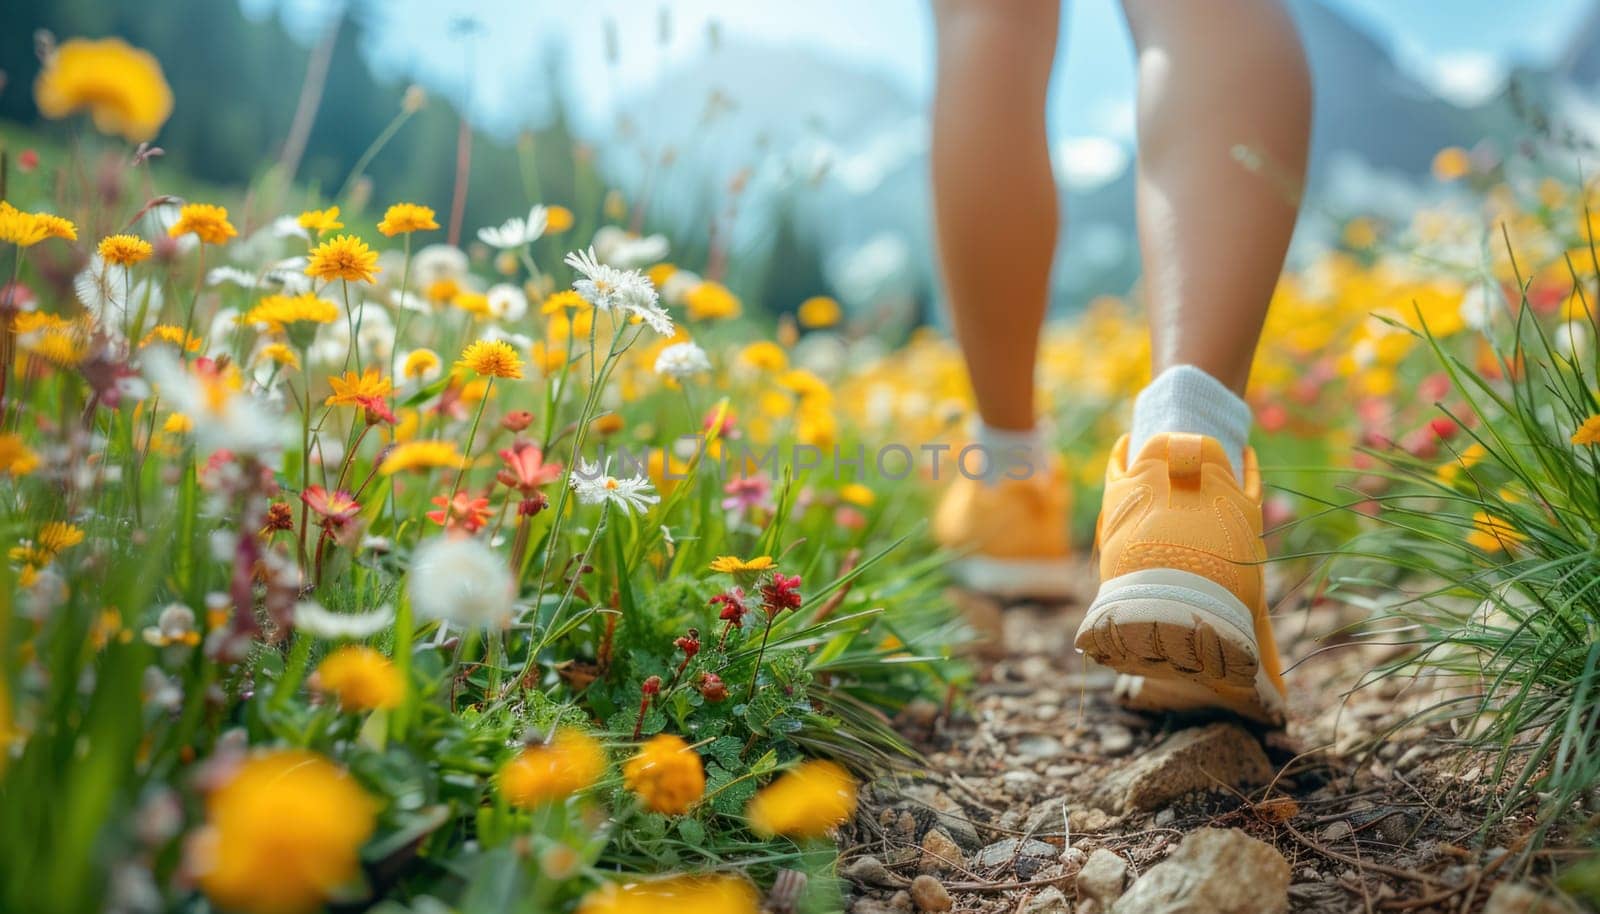 A person in comfortable shoes walks through a flowery meadow on a scenic outdoor trail, surrounded by natures beauty